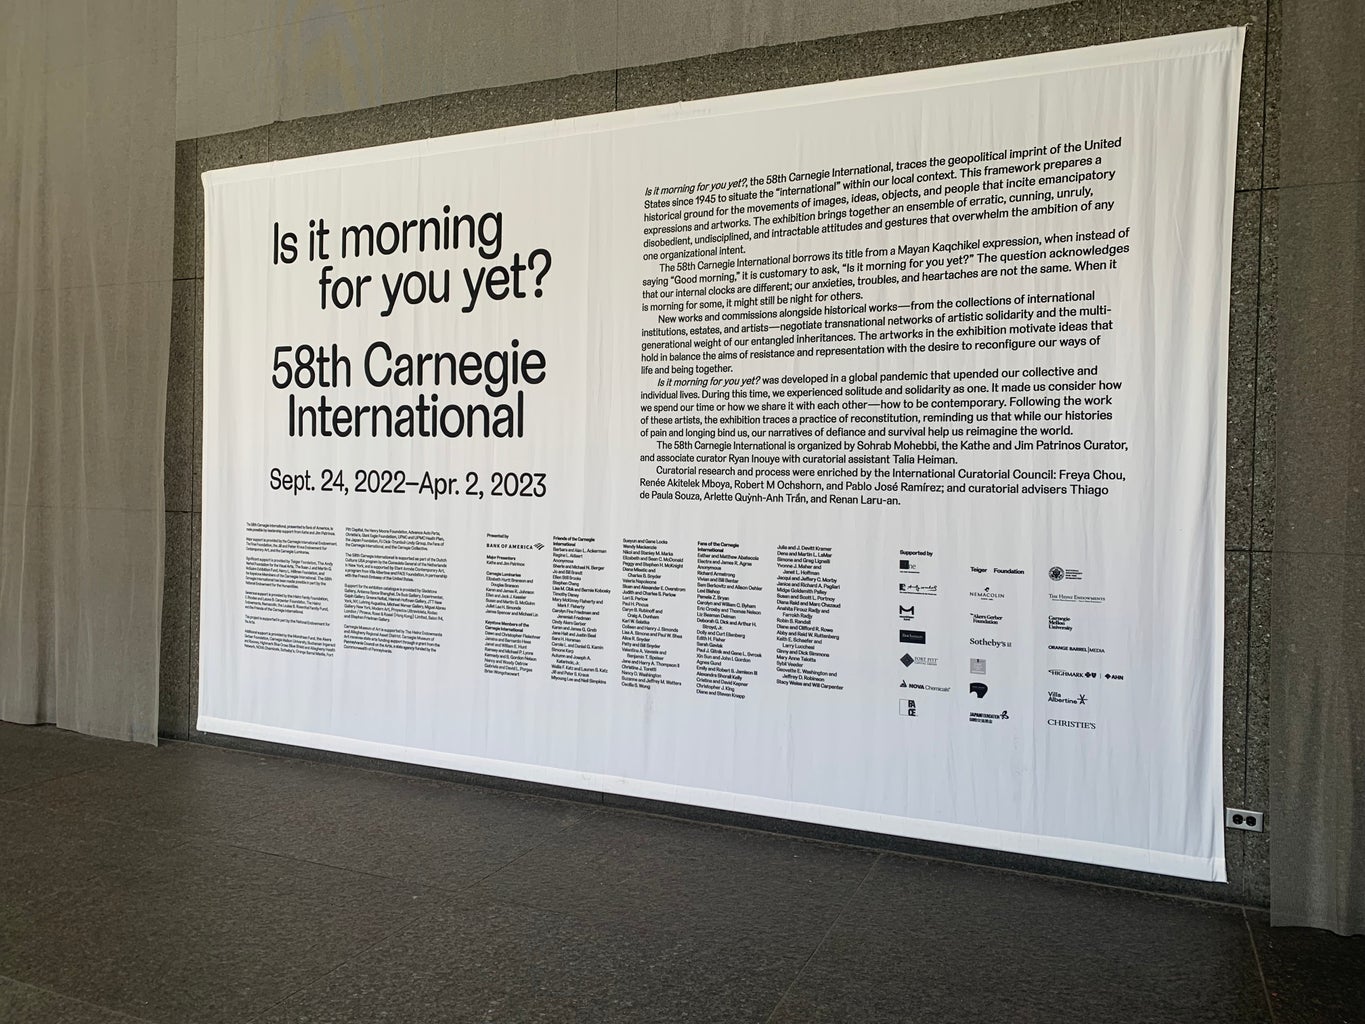 Carnegie Museum of Art - 58th Carnegie International (Is it morning for you yet?)